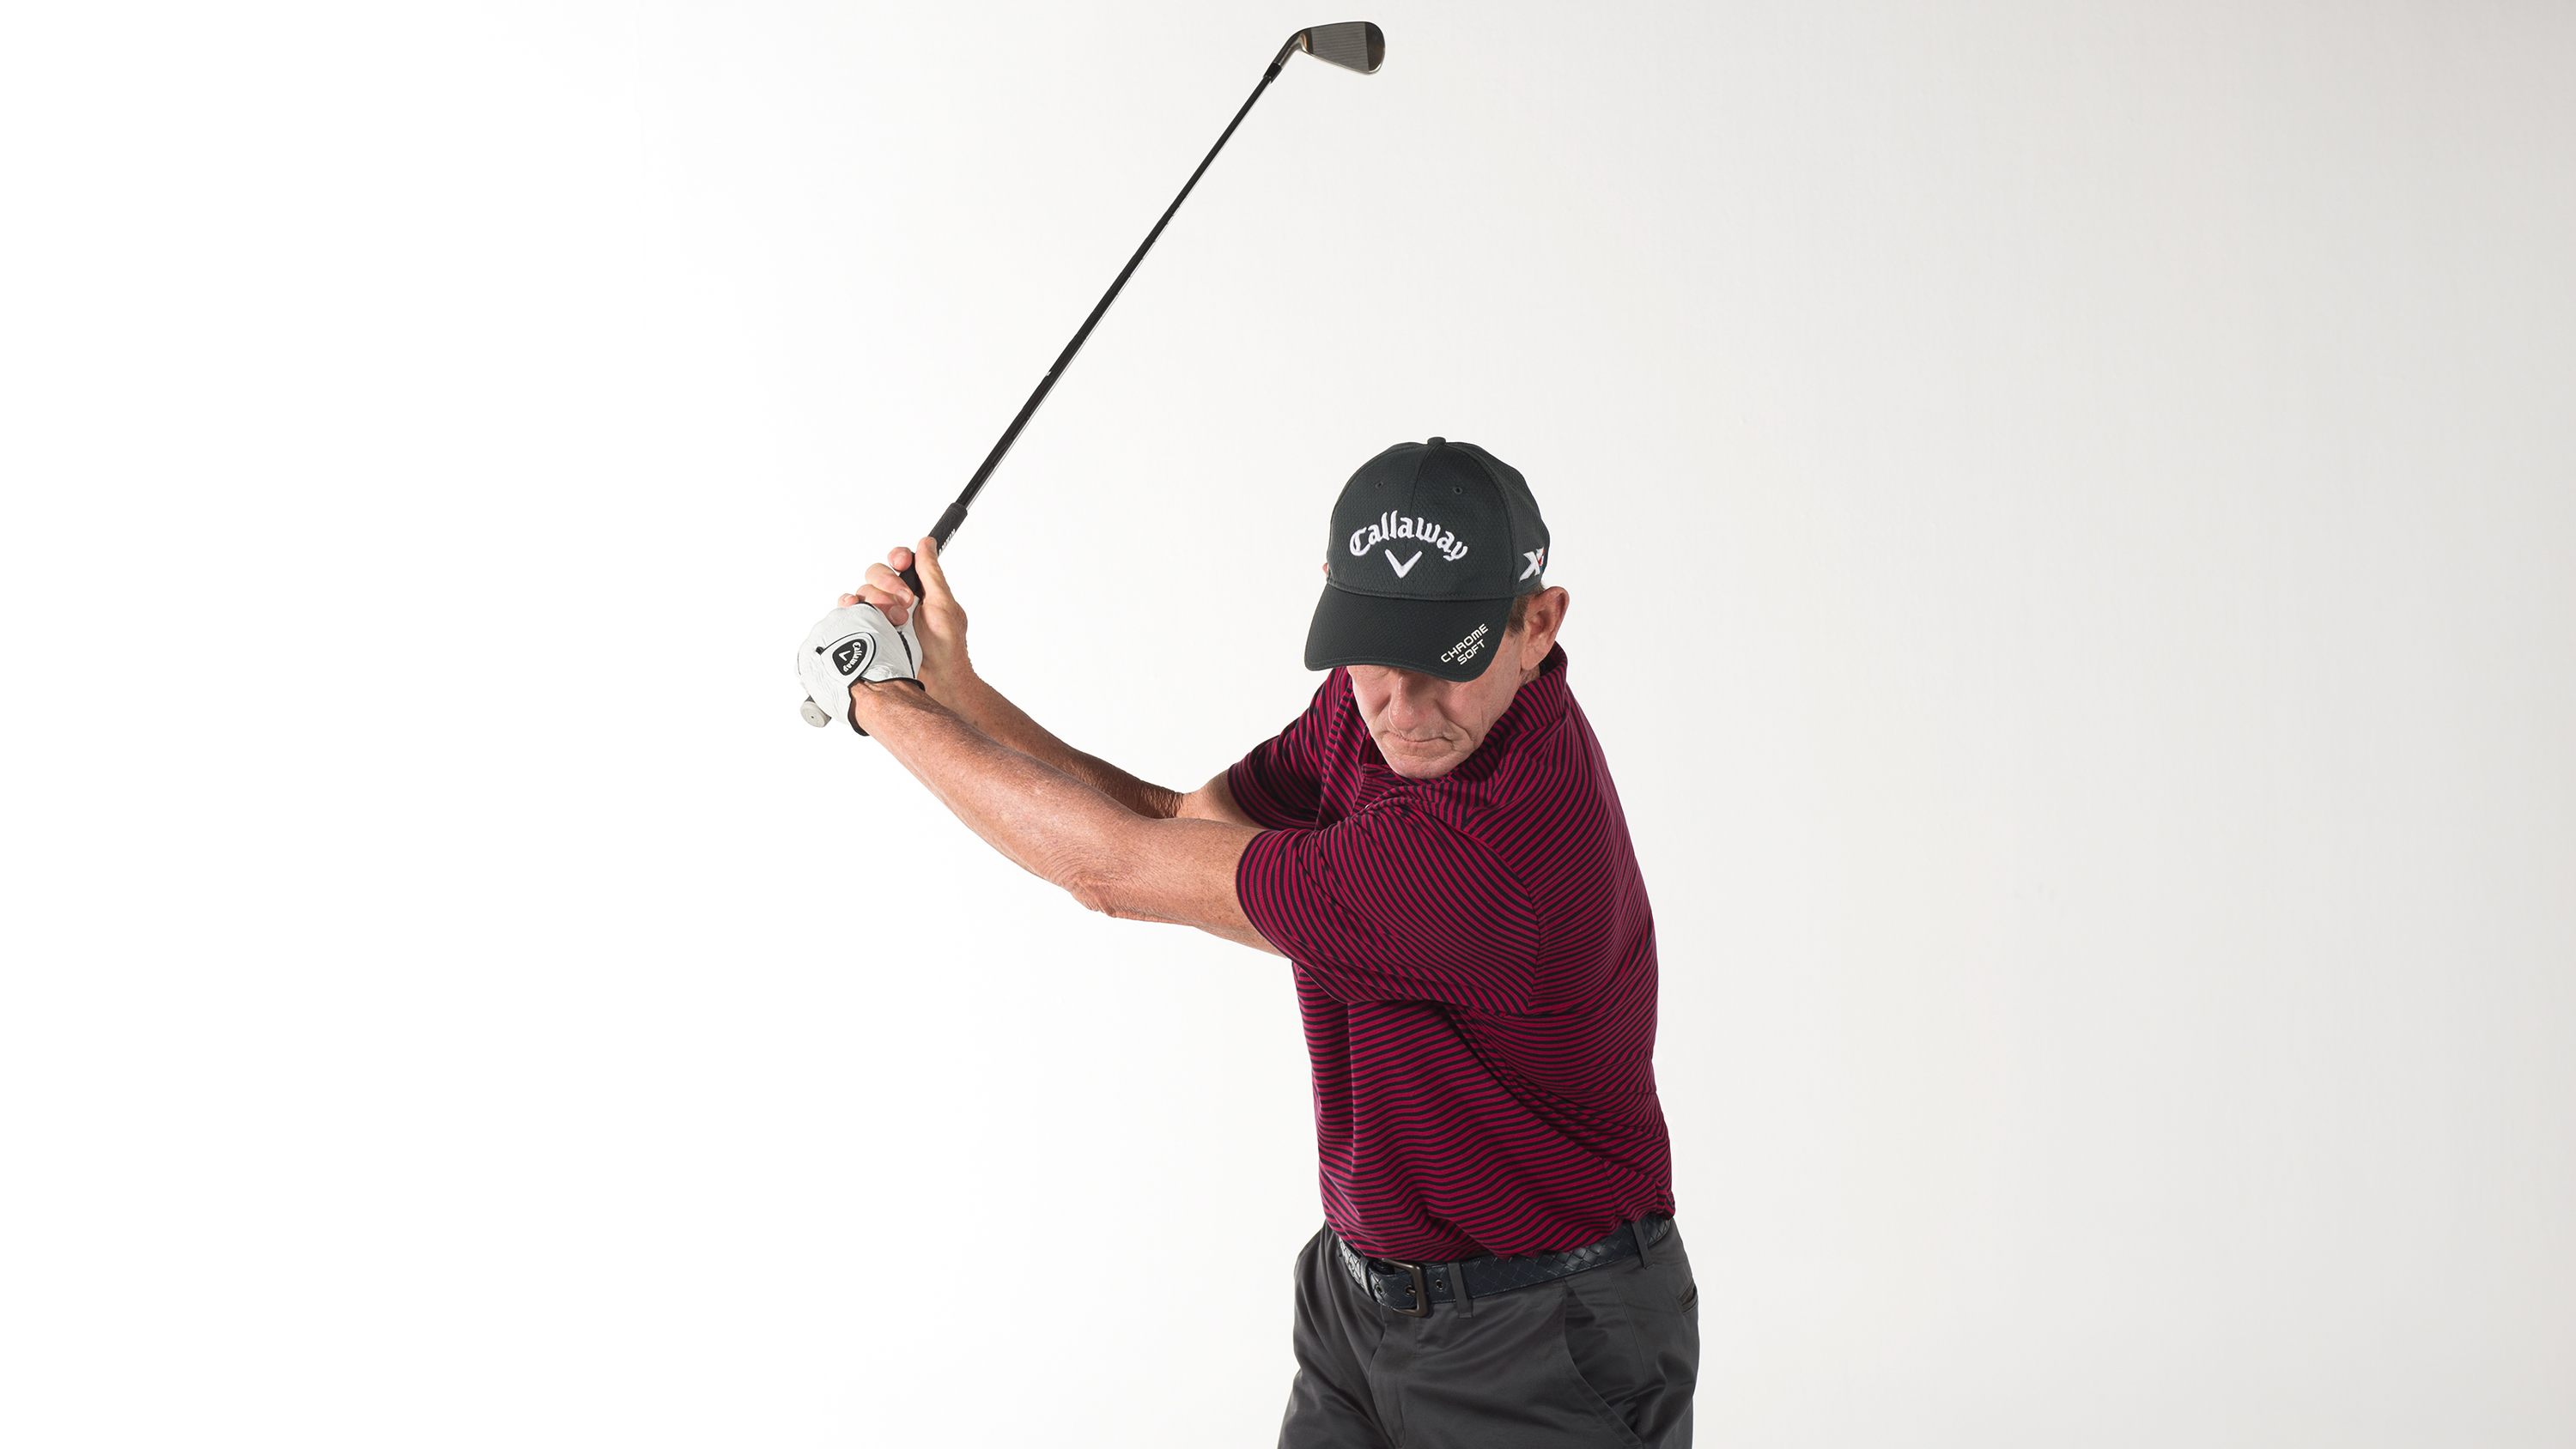 Golf Slice Fix - Part 2 - Check your Grip - Free Online Golf Tips